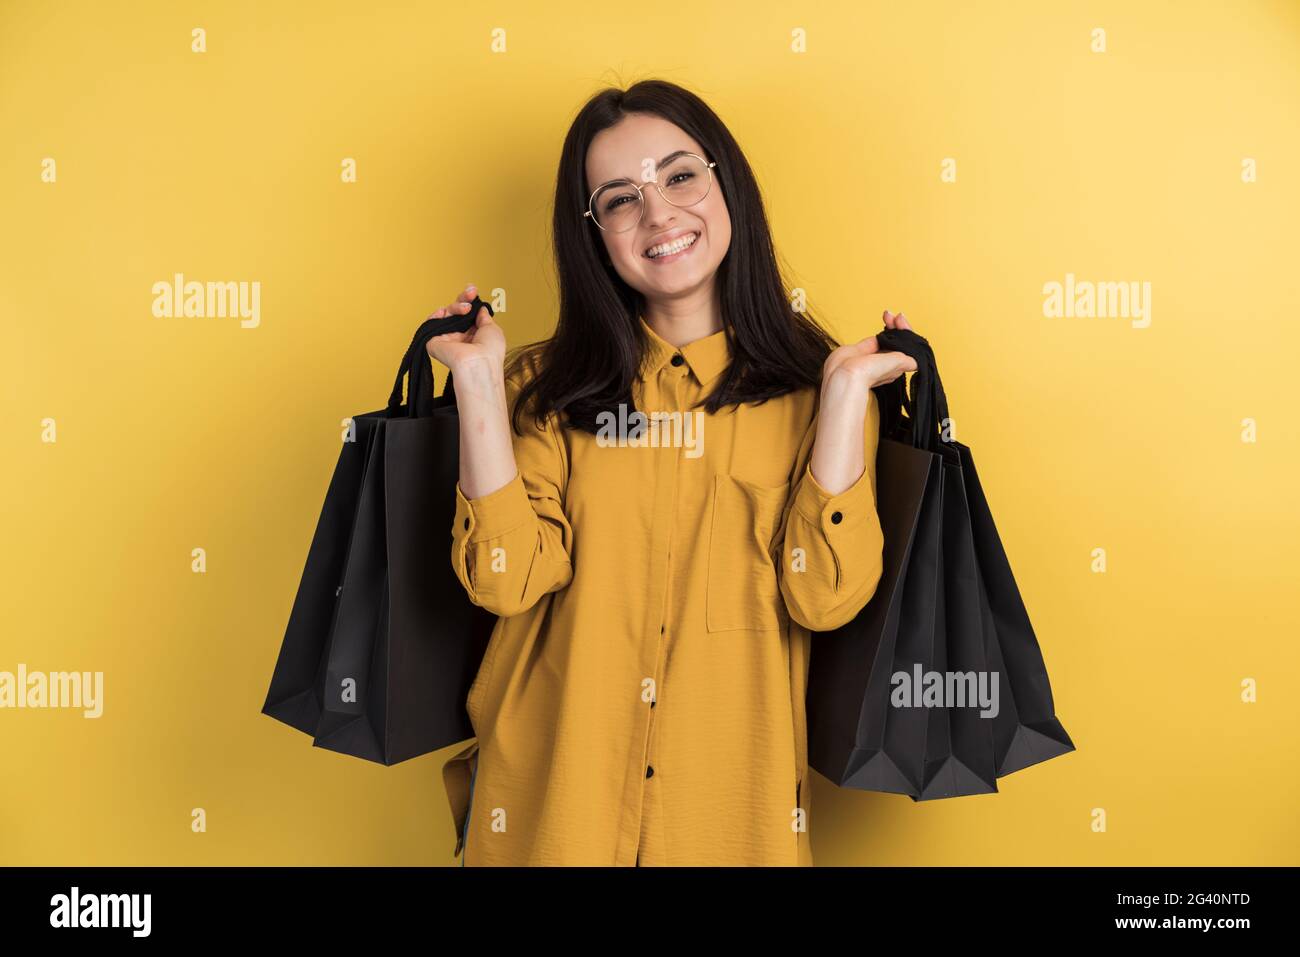 Attractive happy stylish shopaholic woman in glasses holding shopping bags on orange studio background, isolated. Stock Photo